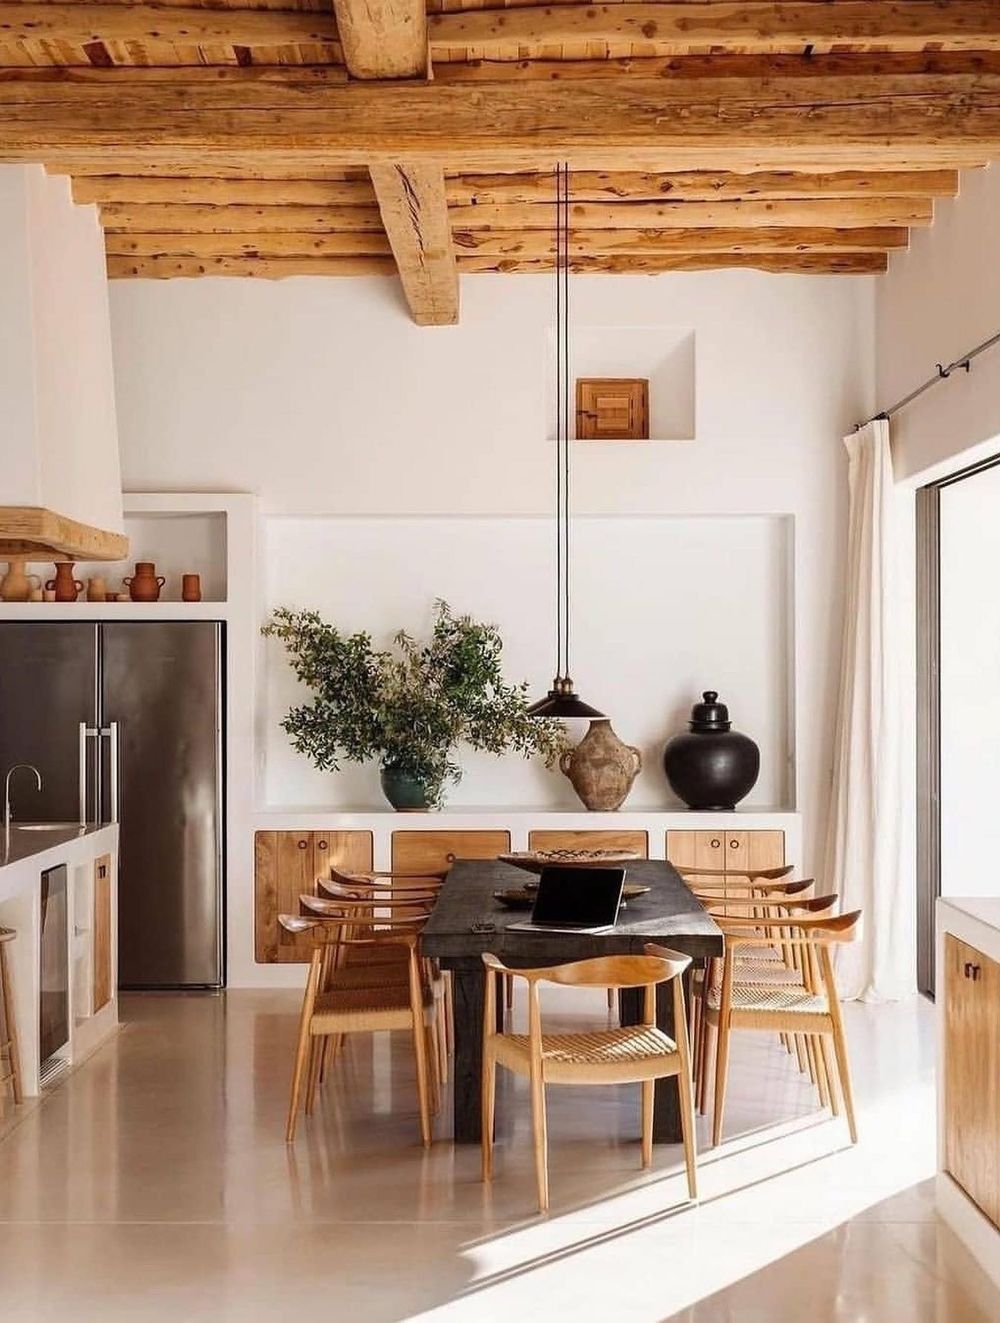 Mediterranean dining room ideas @analuiphotography